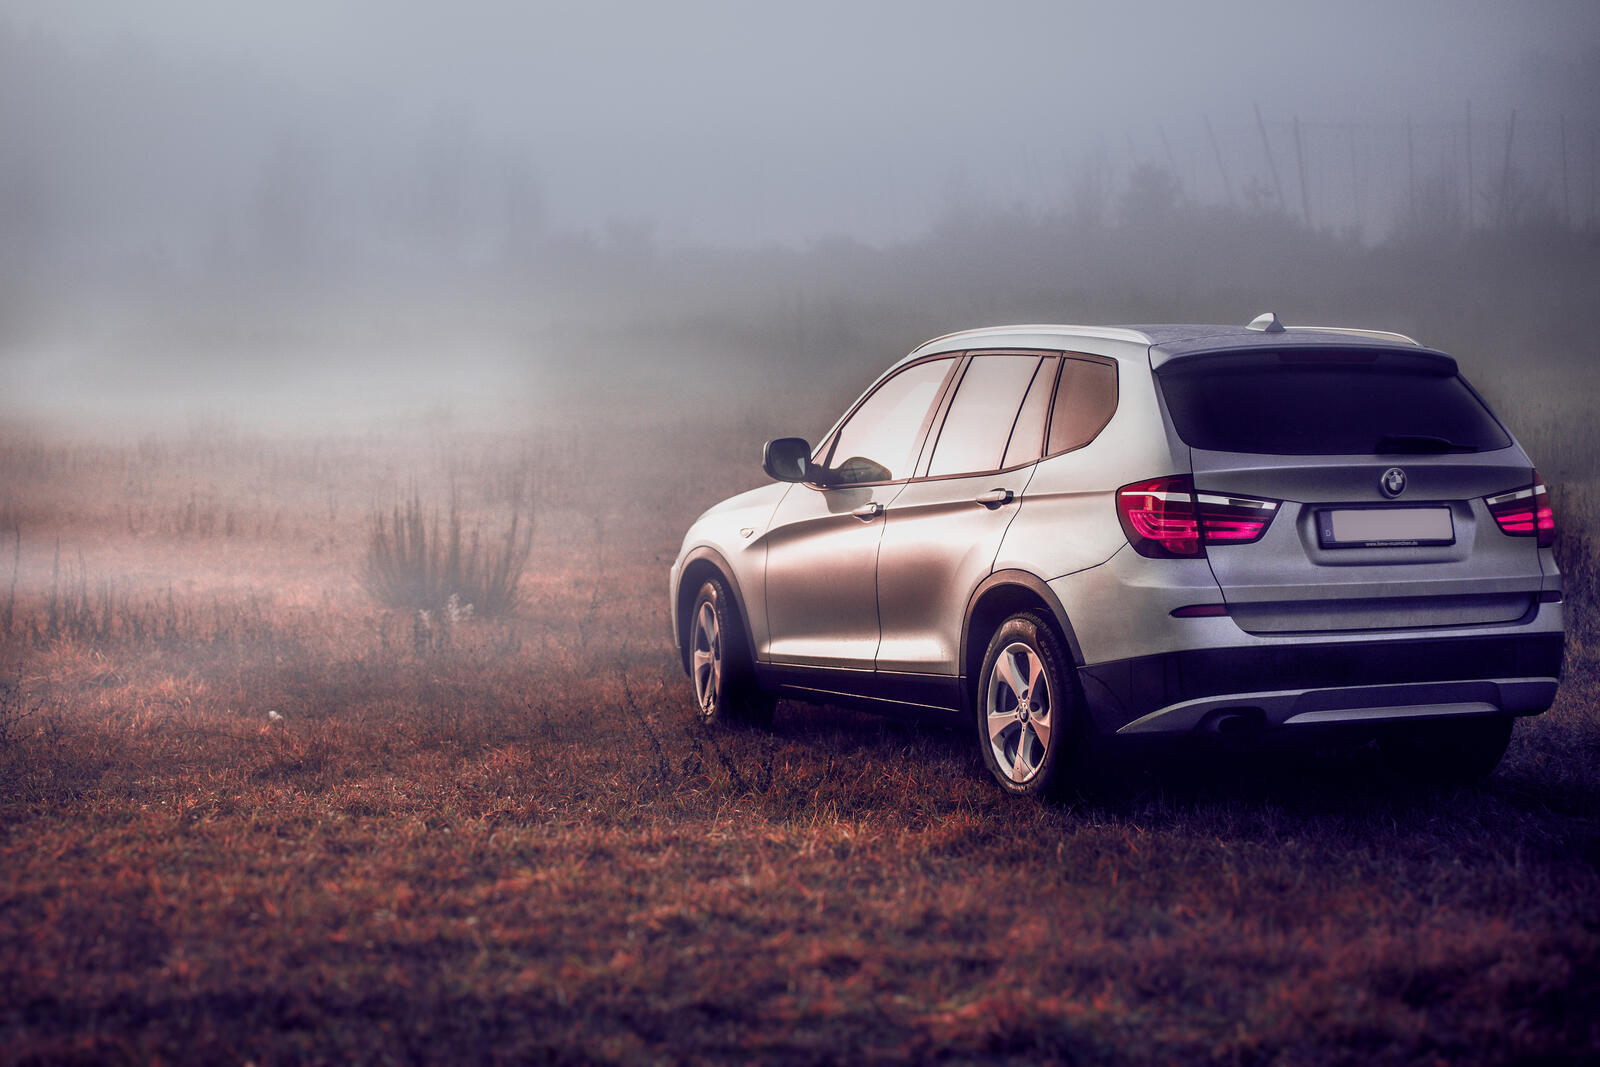 Free photo Bmw x3 in a field with fog.